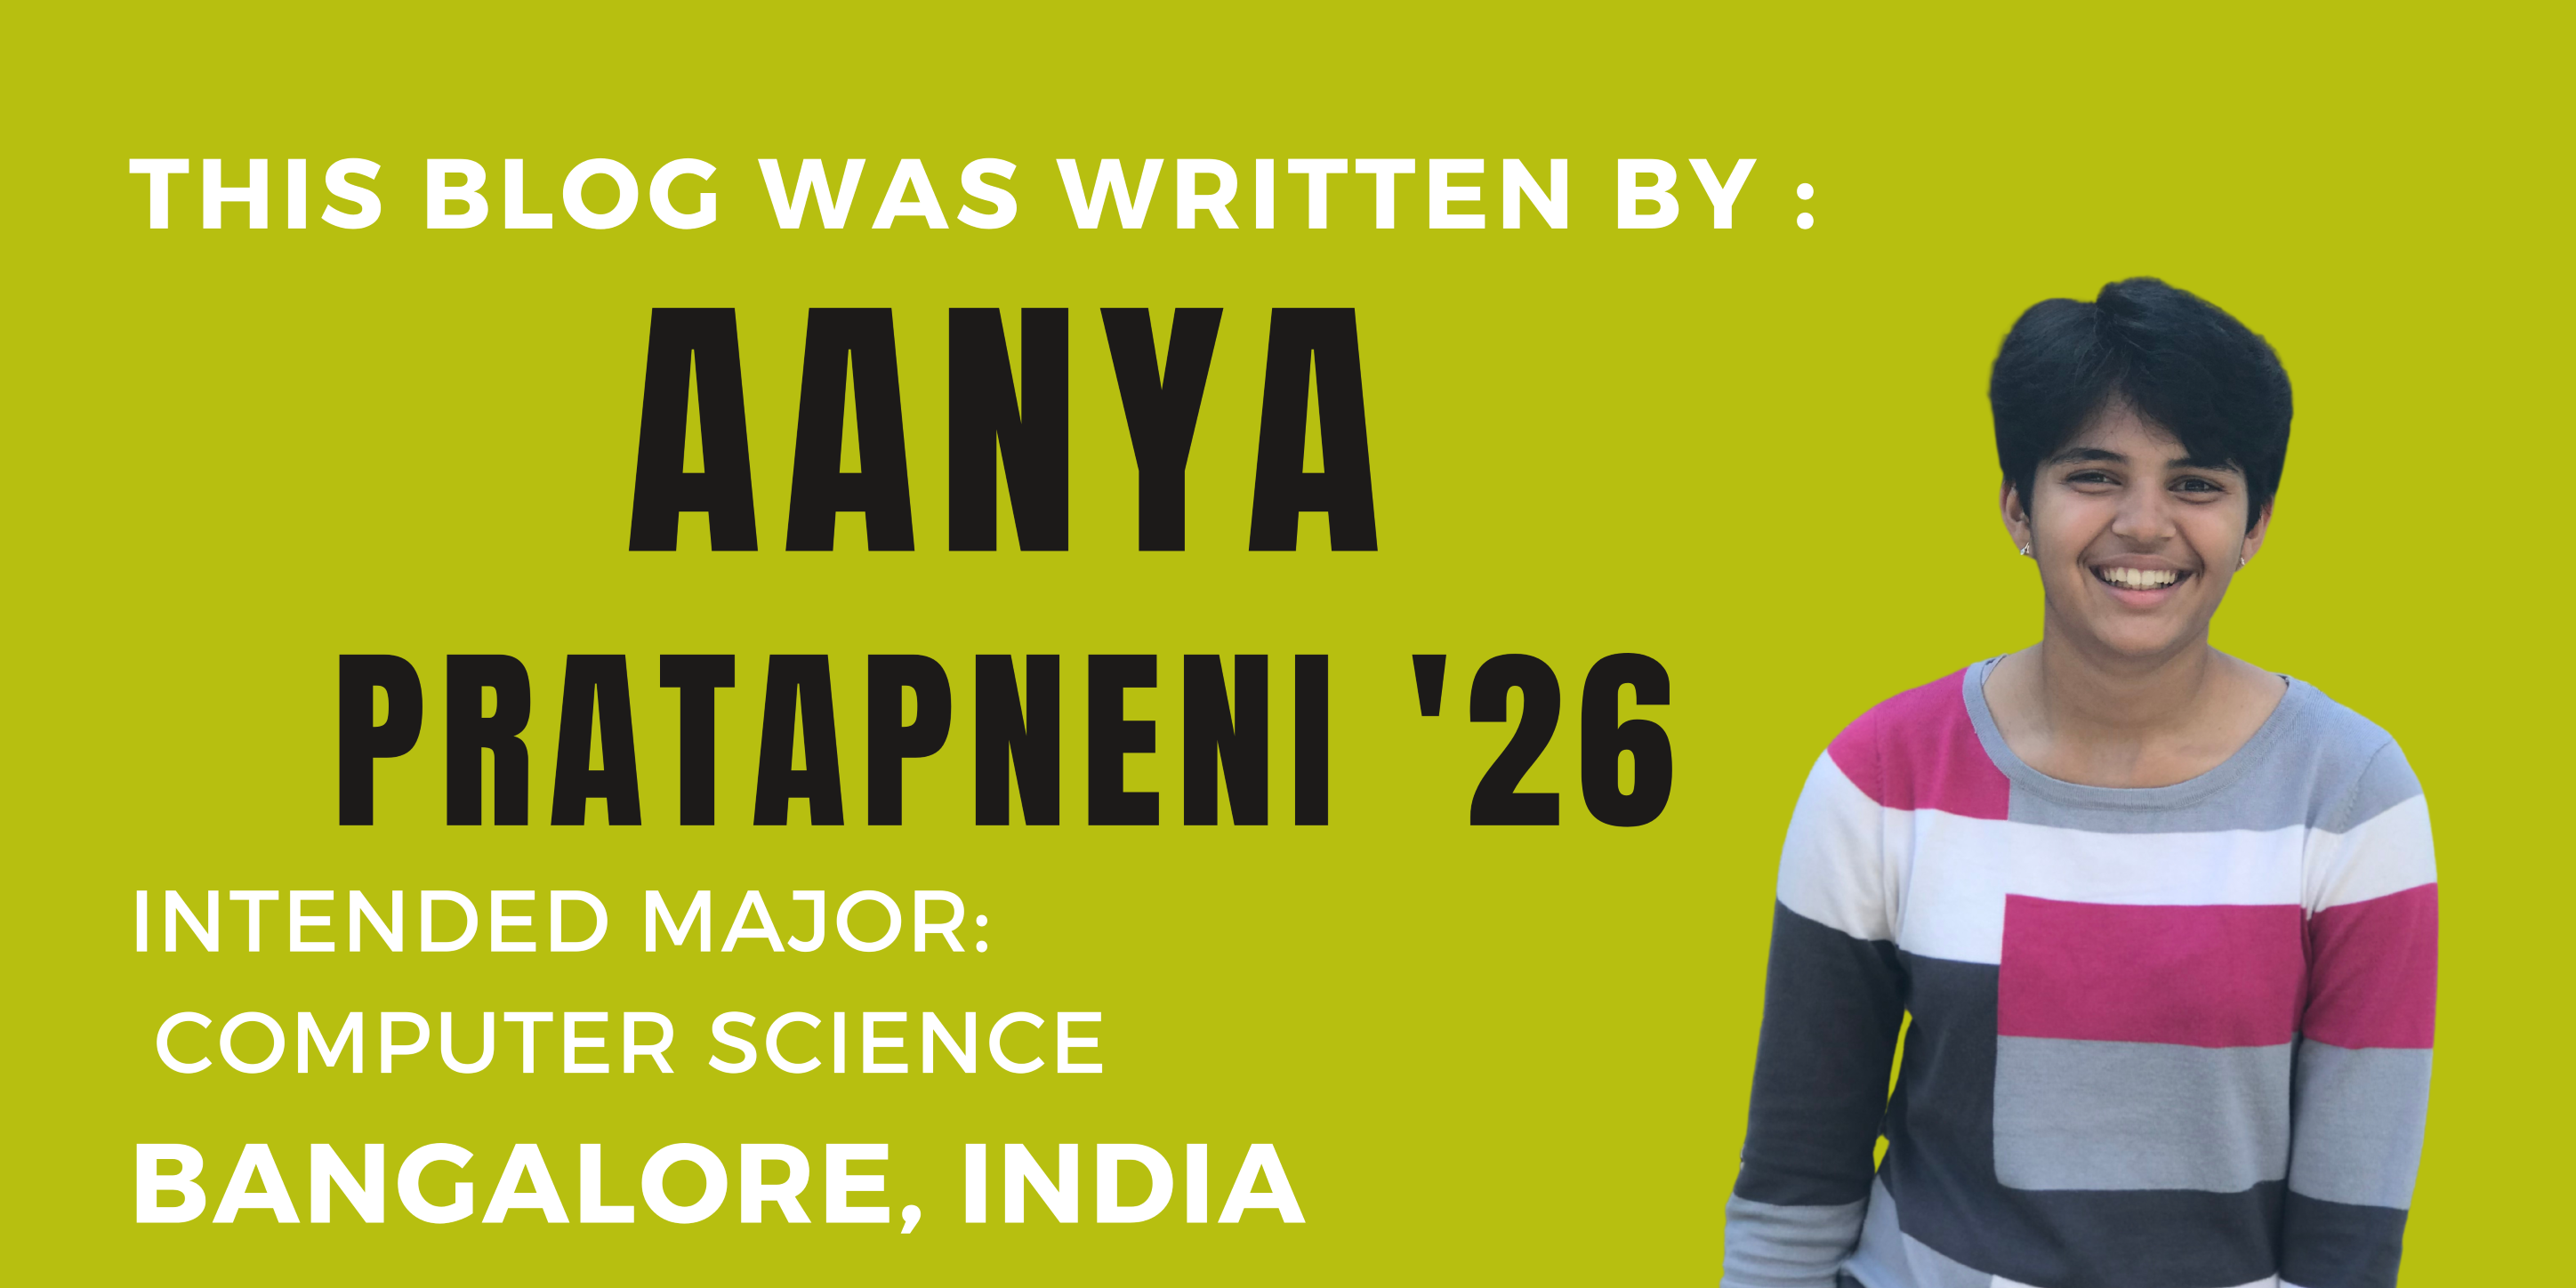 This blog was written by Aanya Pratapneni '26. Intended major: Computer Science. Bangladore, India